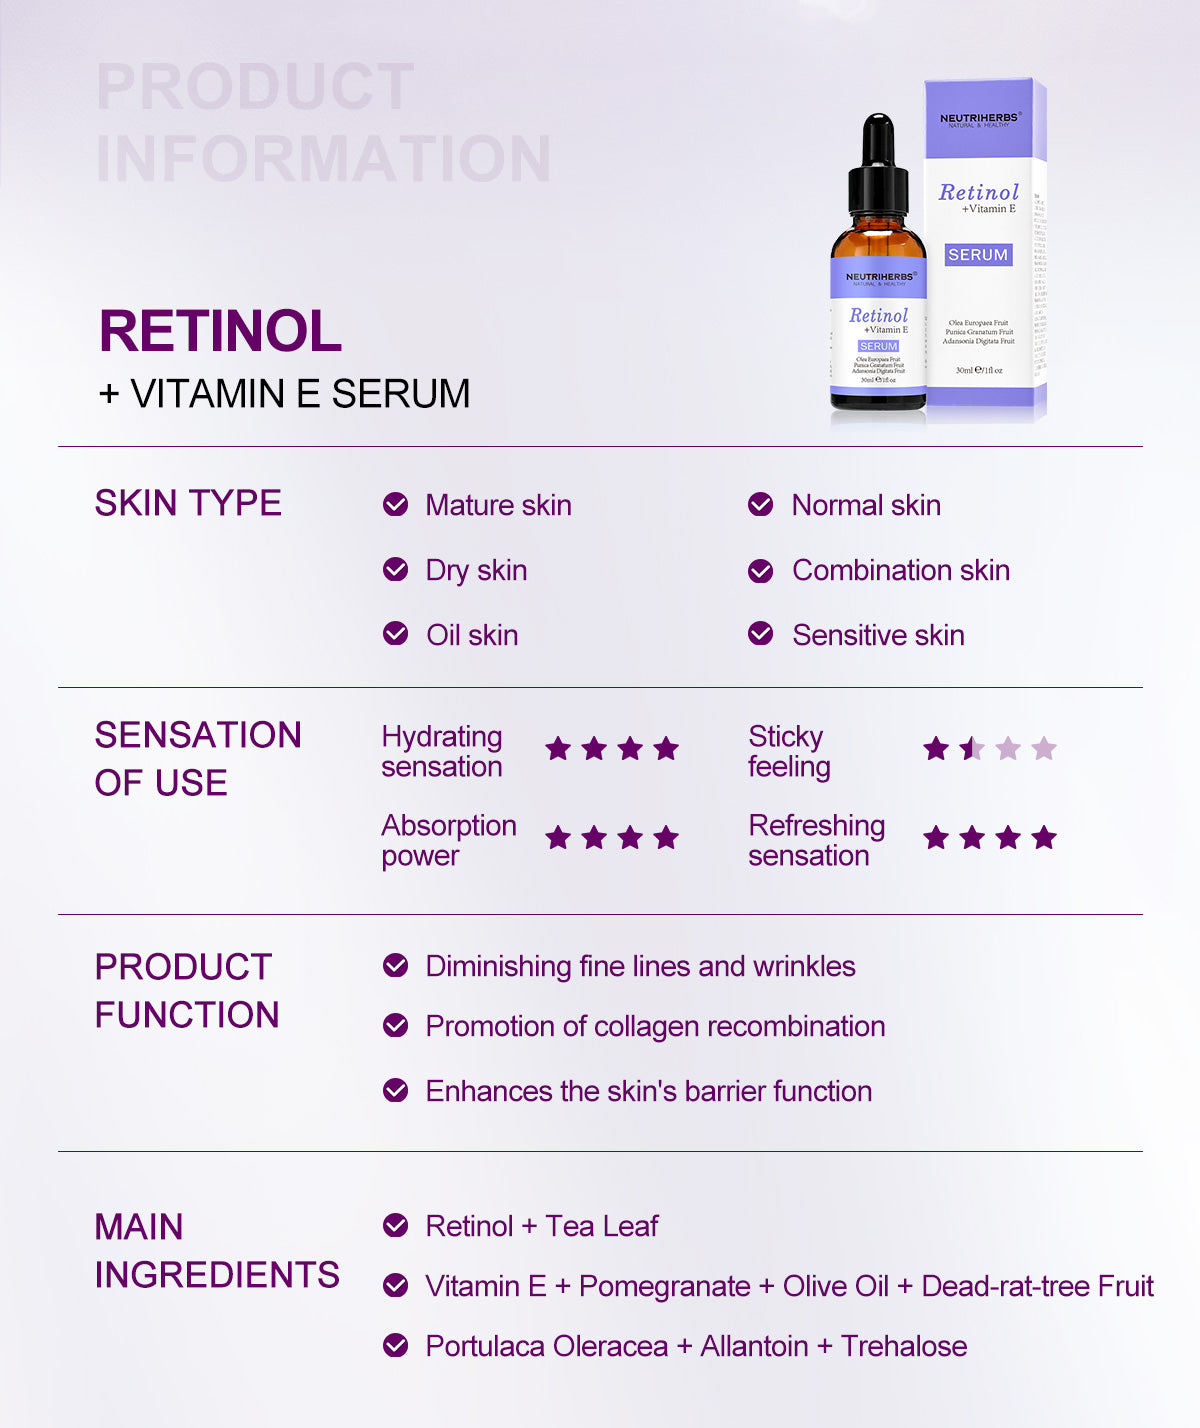 Private Label Retinol Serum For Wrinkles and Acne-prone Skin